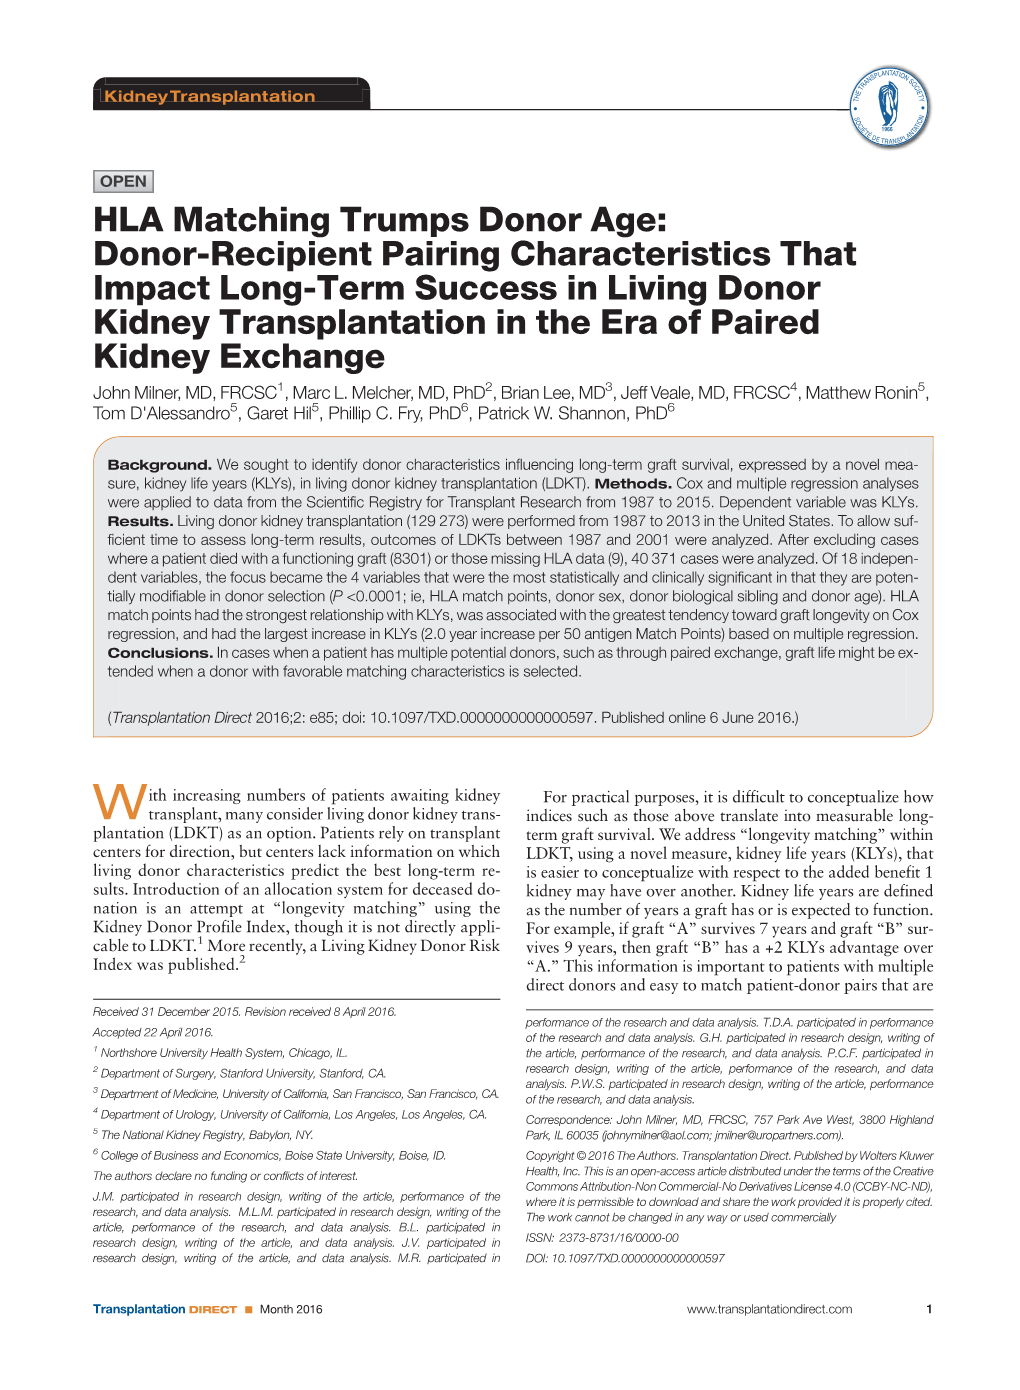 HLA Matching Trumps Donor Age: Donor-Recipient Pairing Characteristics That Impact Long-Term Success in Living Donor Kidney Tran